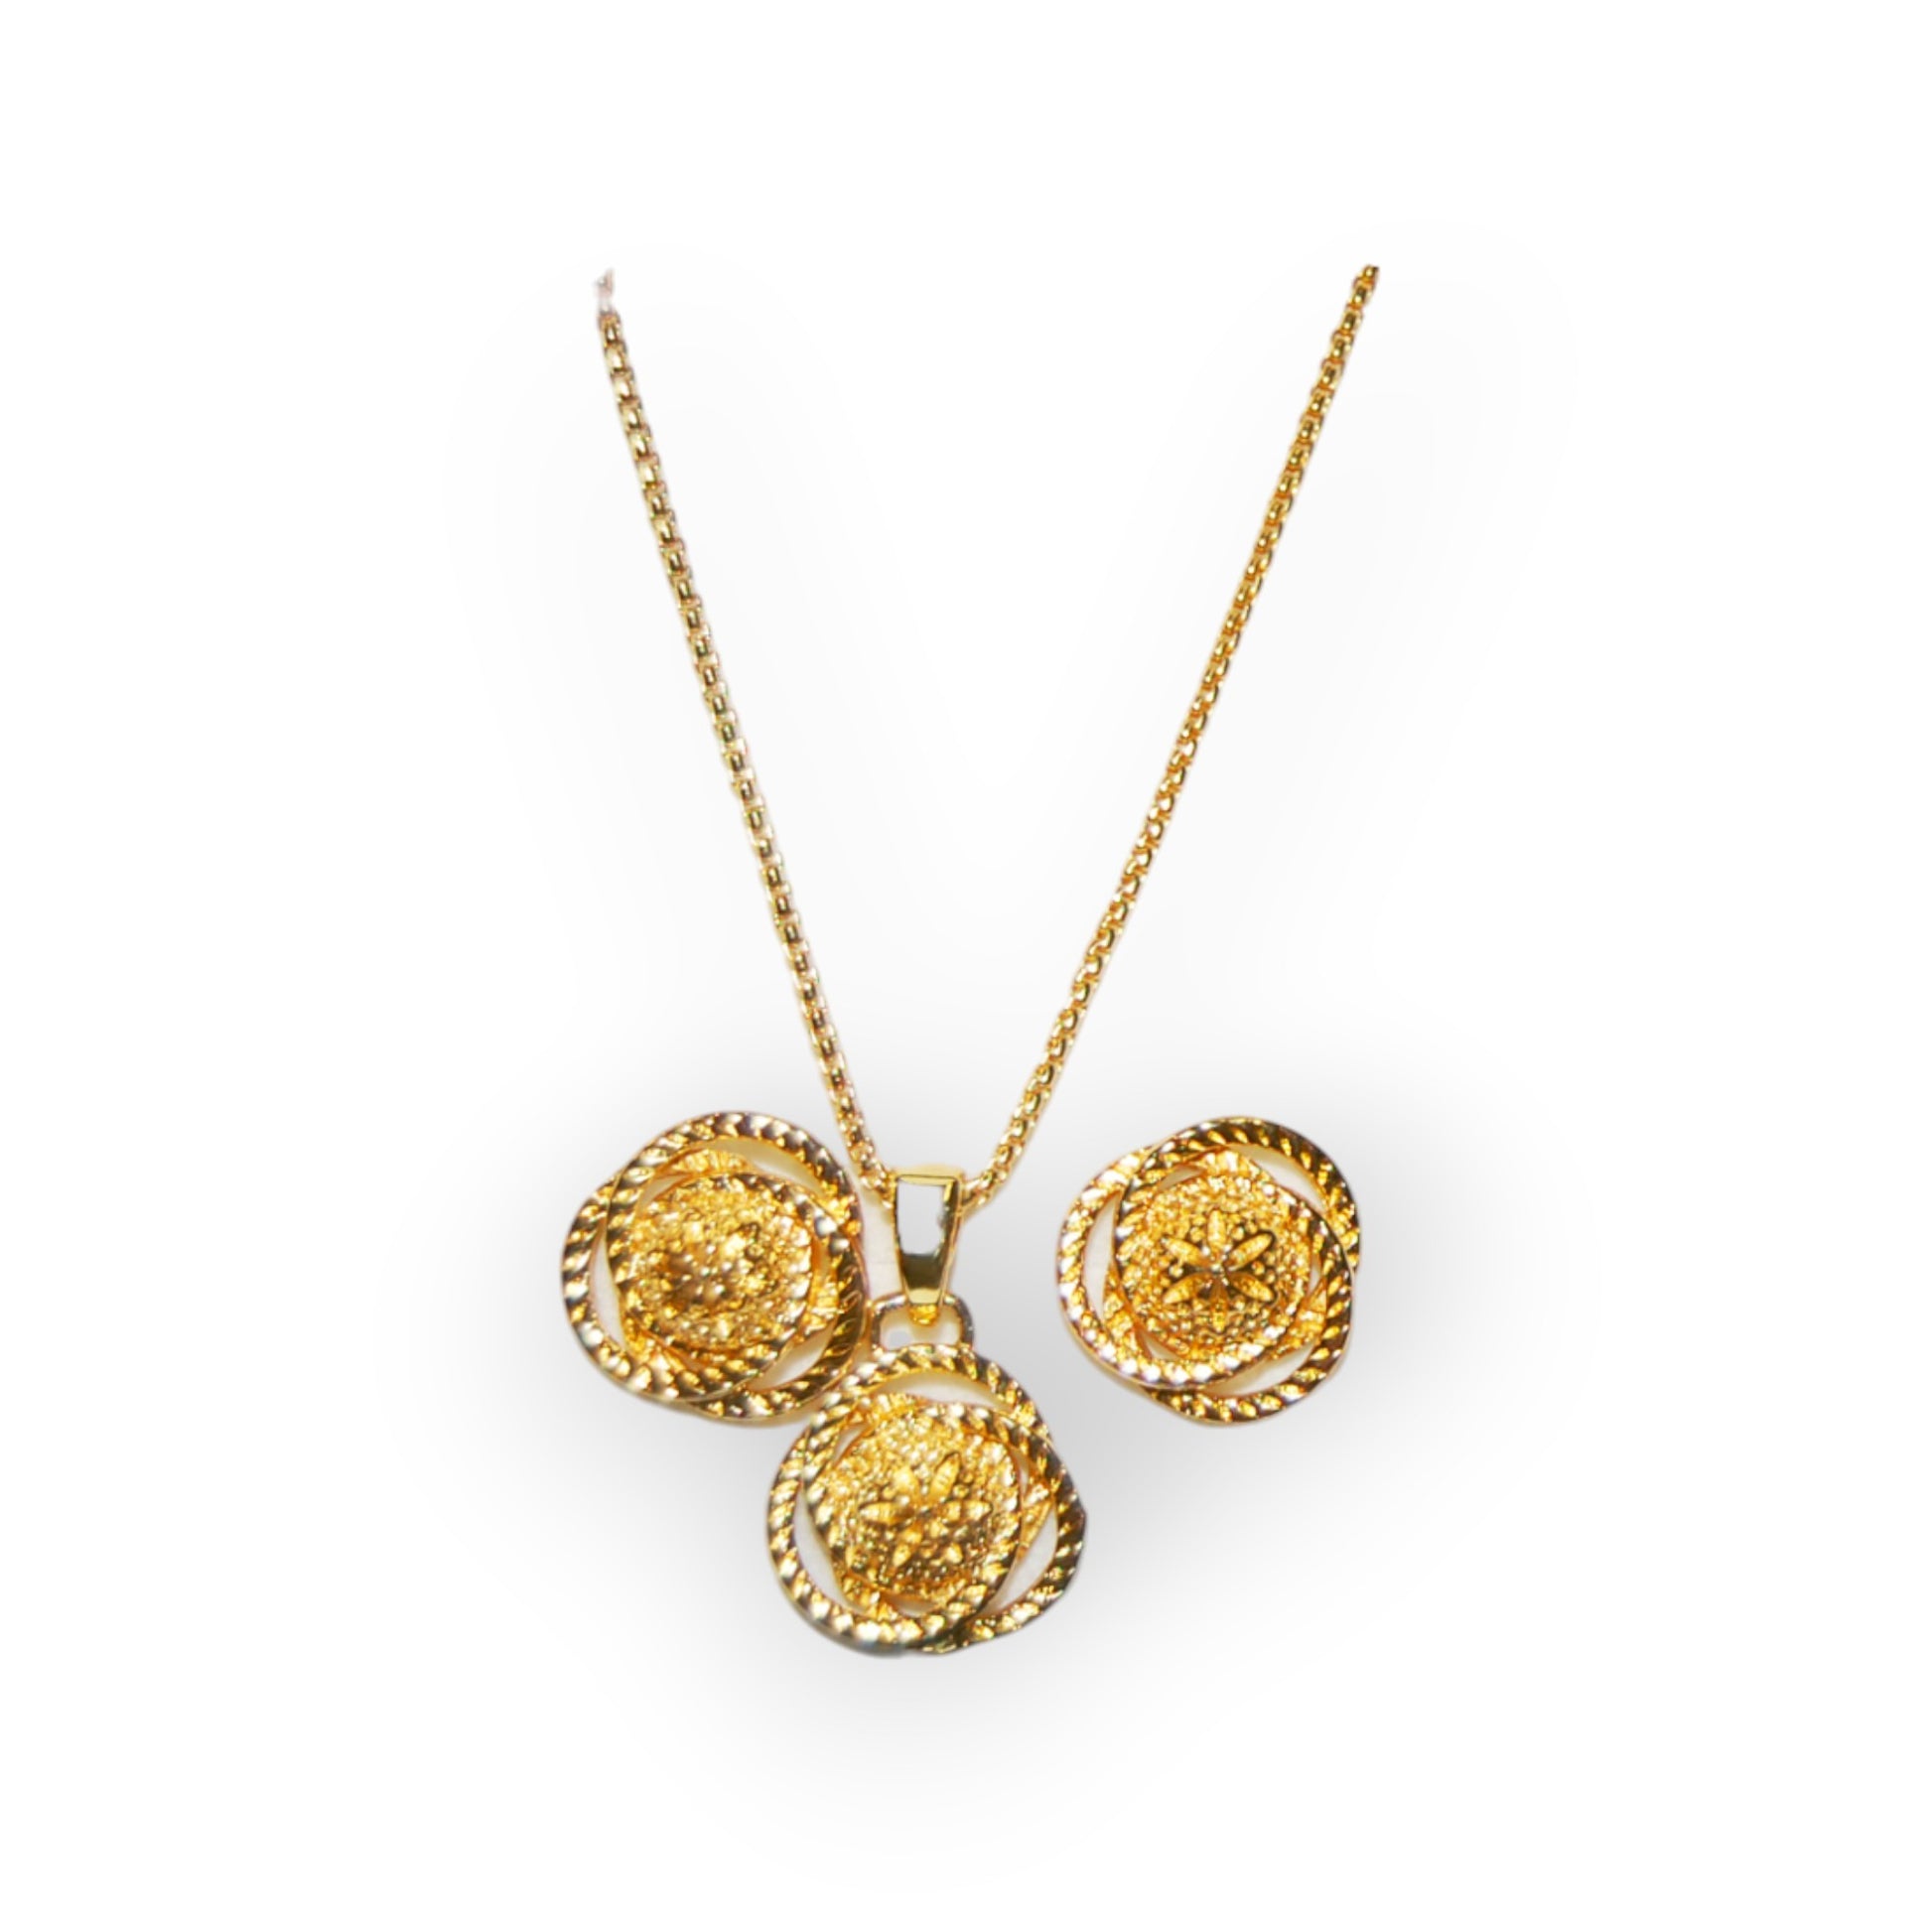 Gold-Plated Necklace, Earring and Pendant